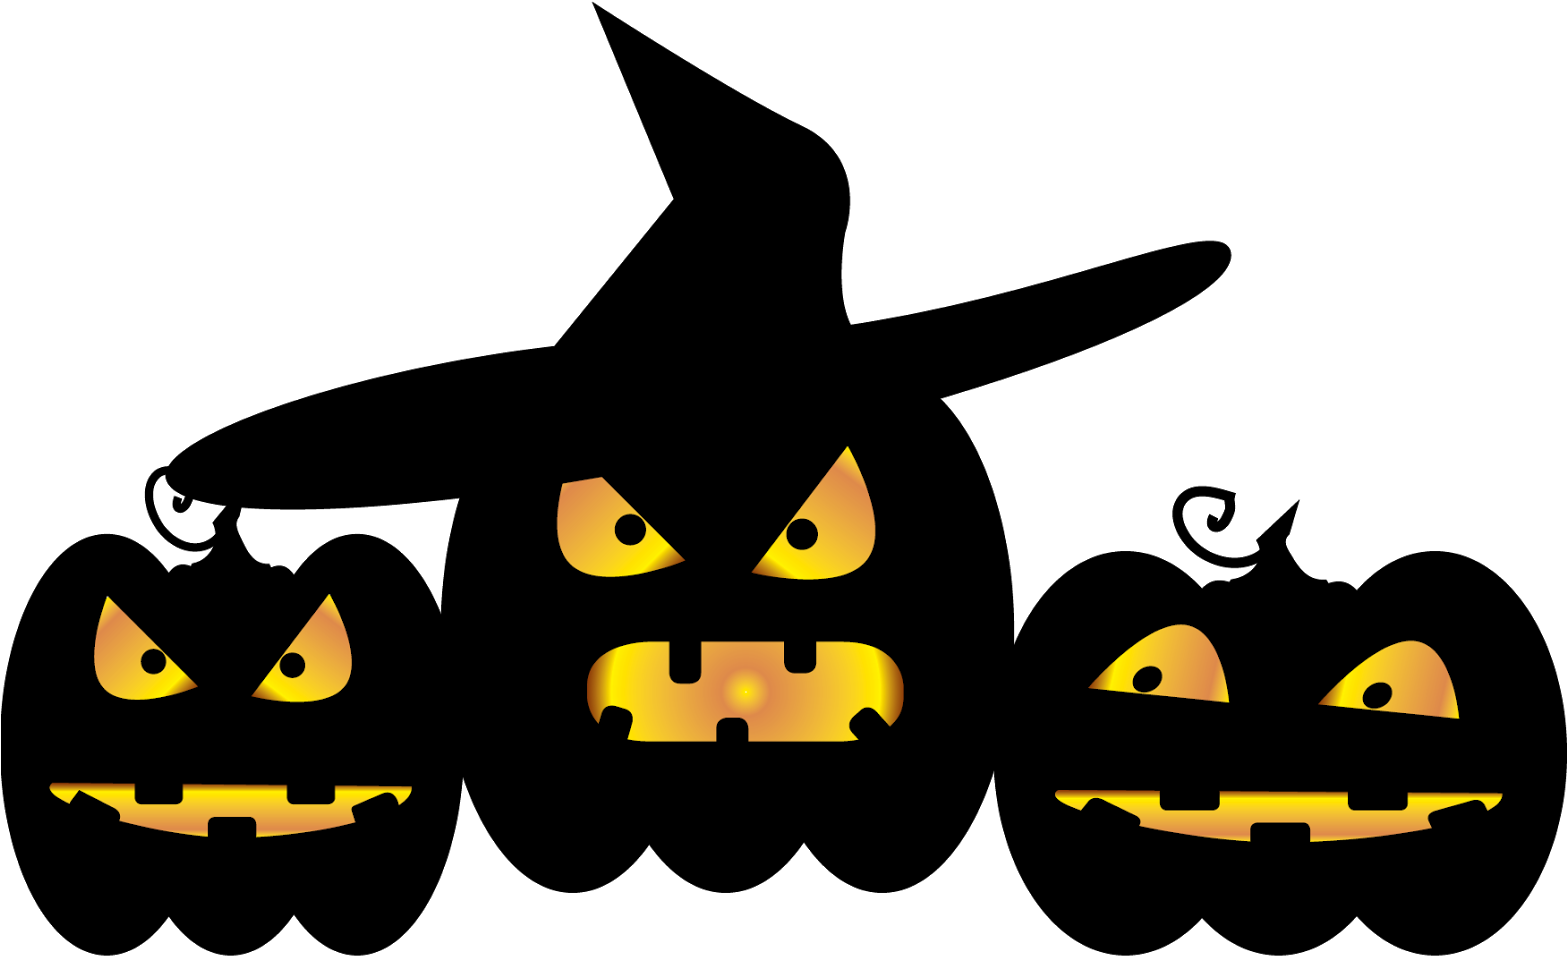 Happy Halloween From Isc Surfaces - Jack-o'-lantern (1600x1001)